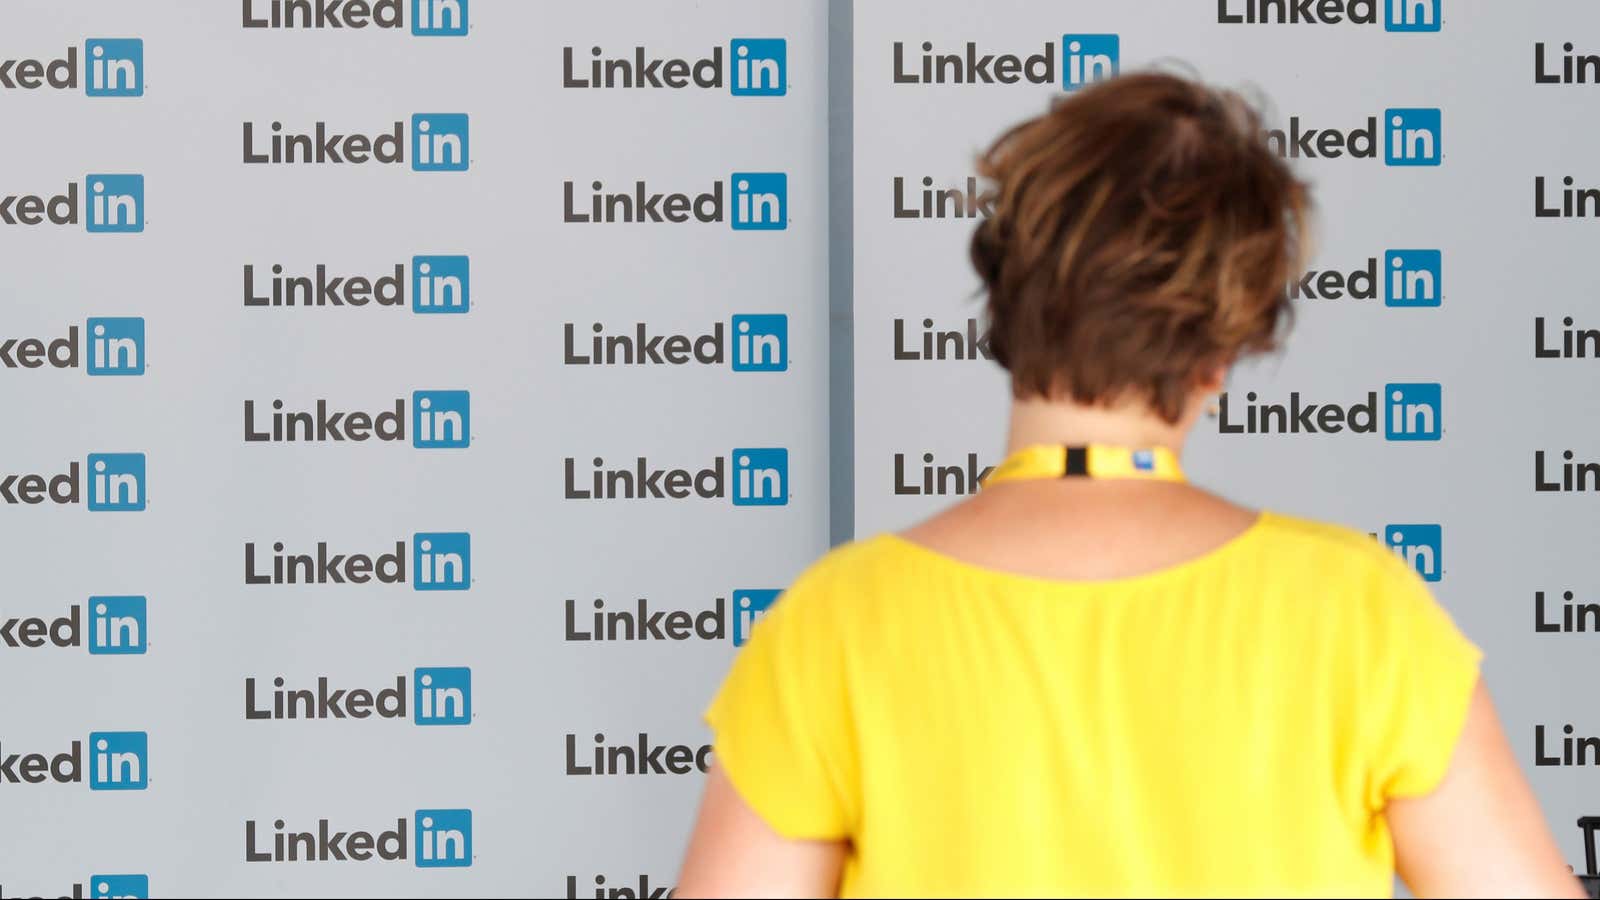 Do not treat LinkedIn like you would an in-person networking event, writes our etiquette columnist.